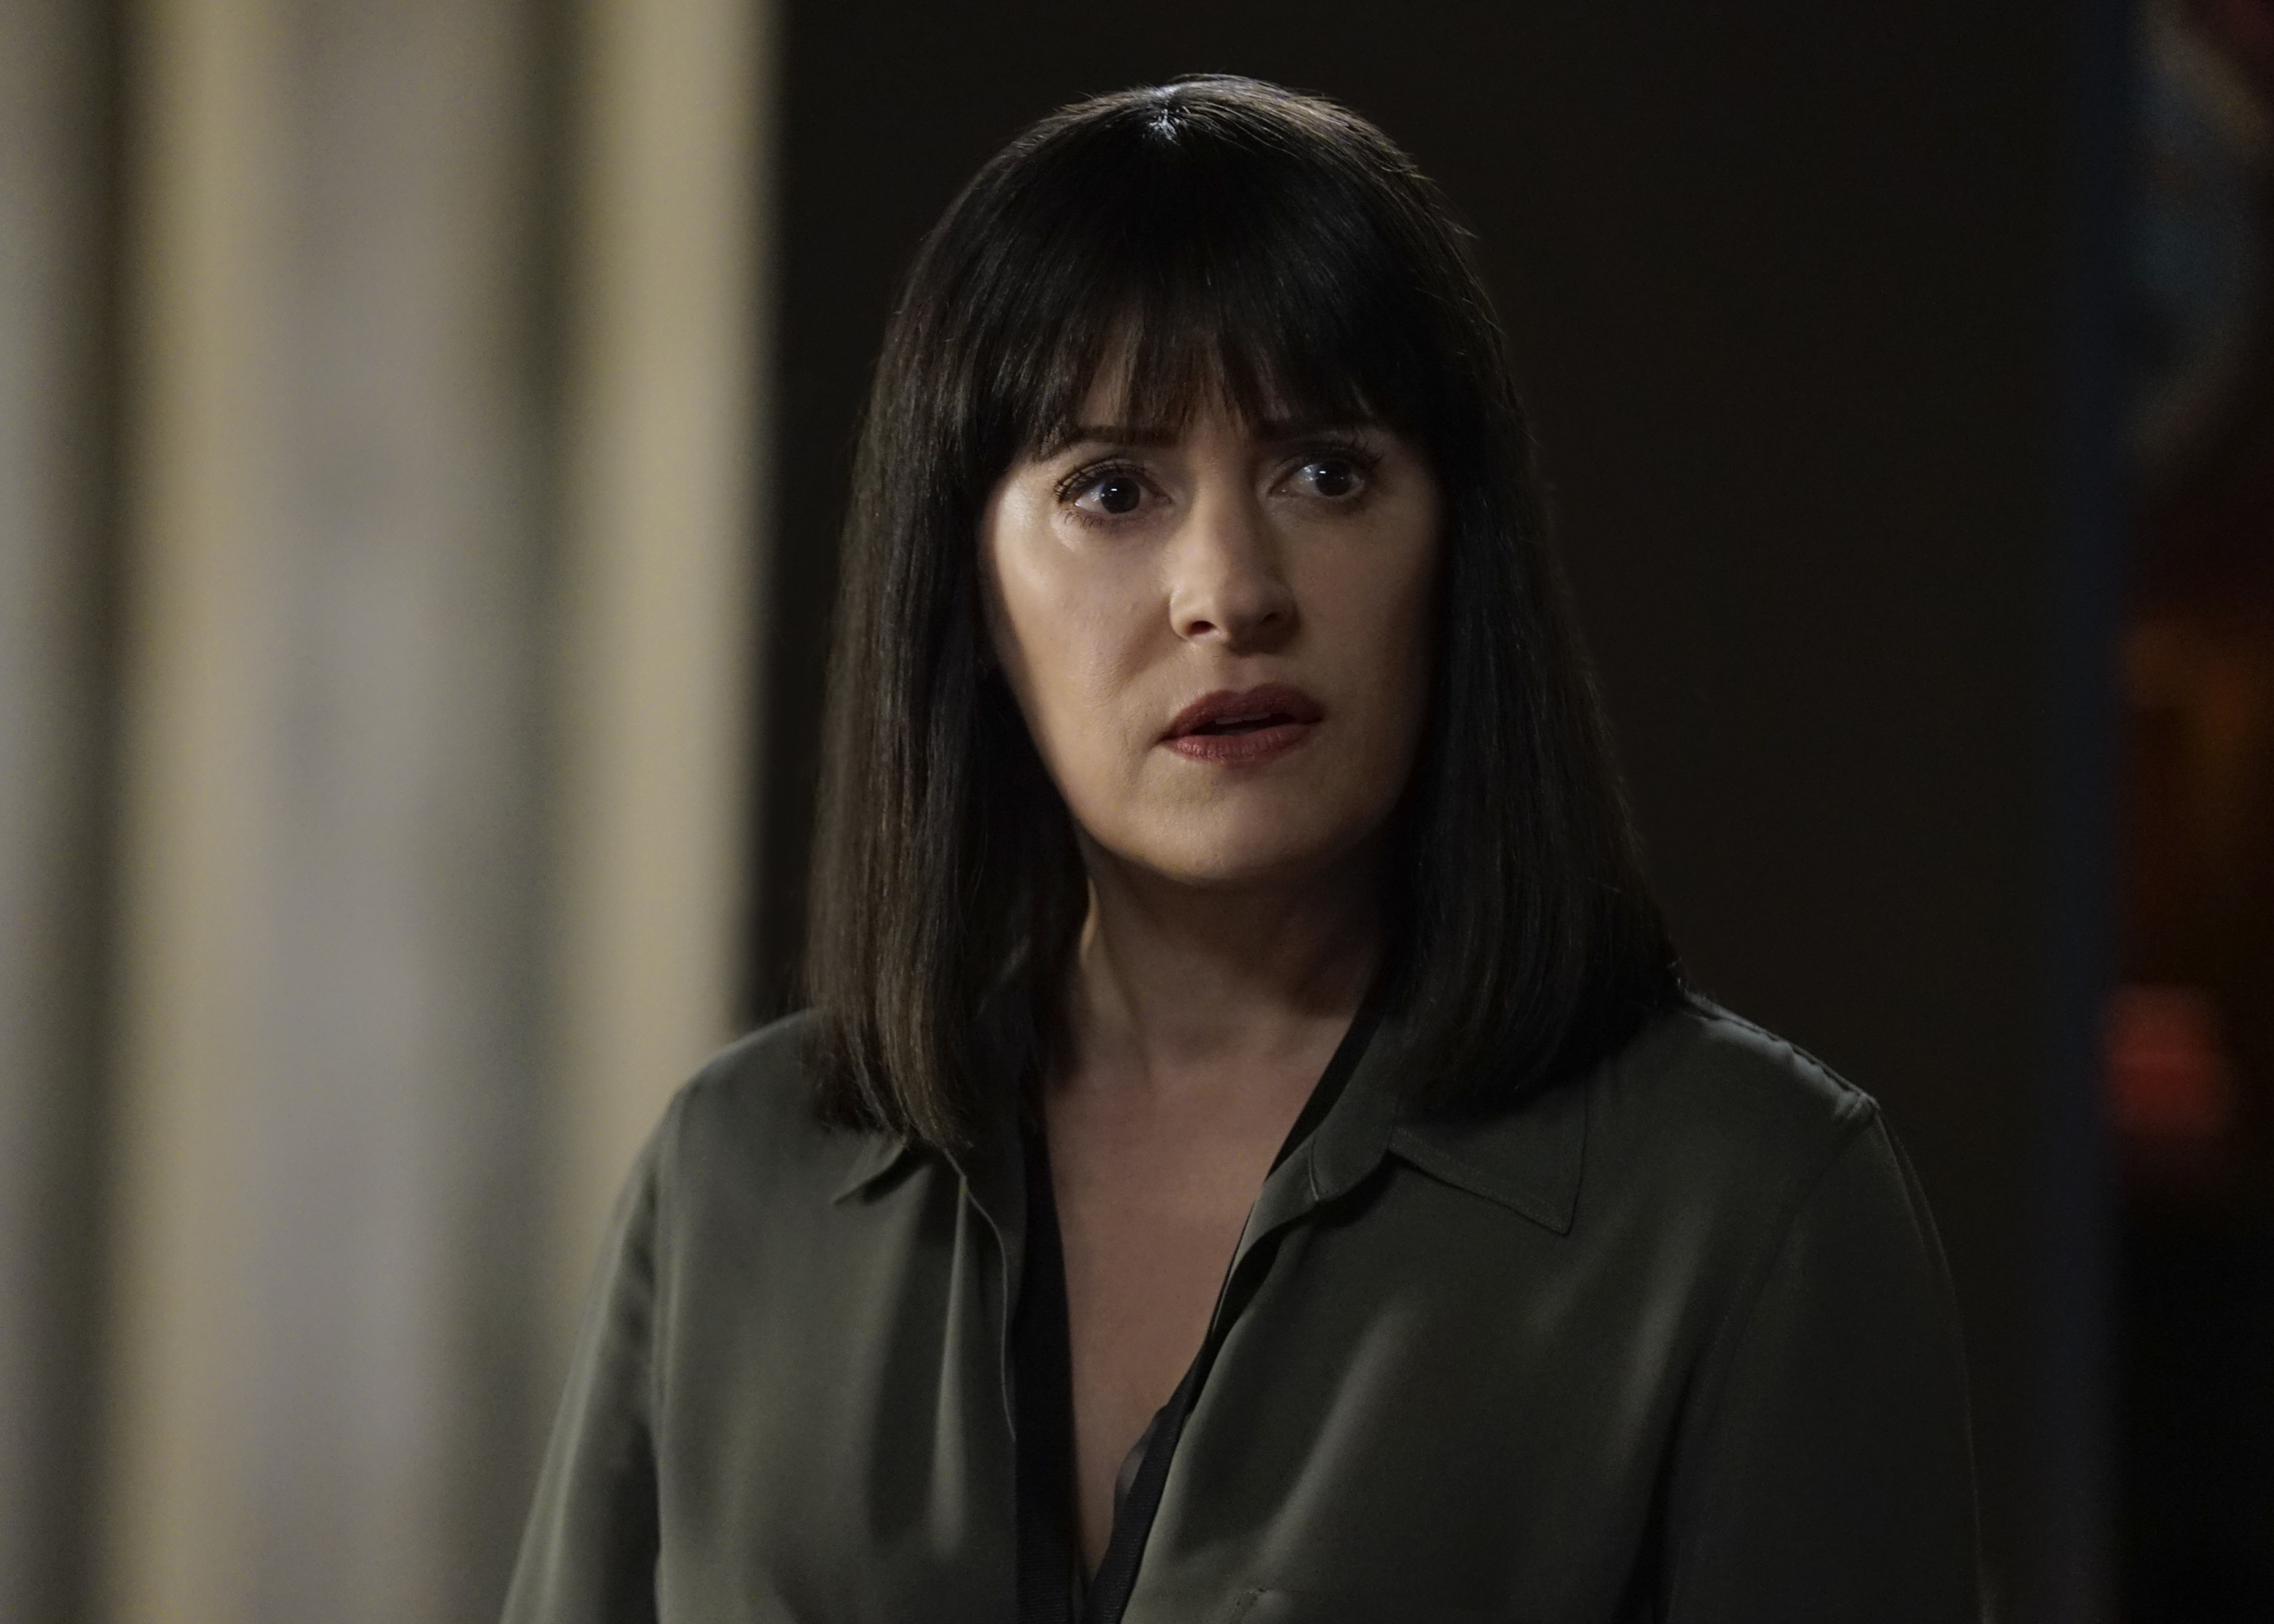 Paget Brewster as Emily Prentiss during an episode of "Criminal Minds." | Source: Getty Images